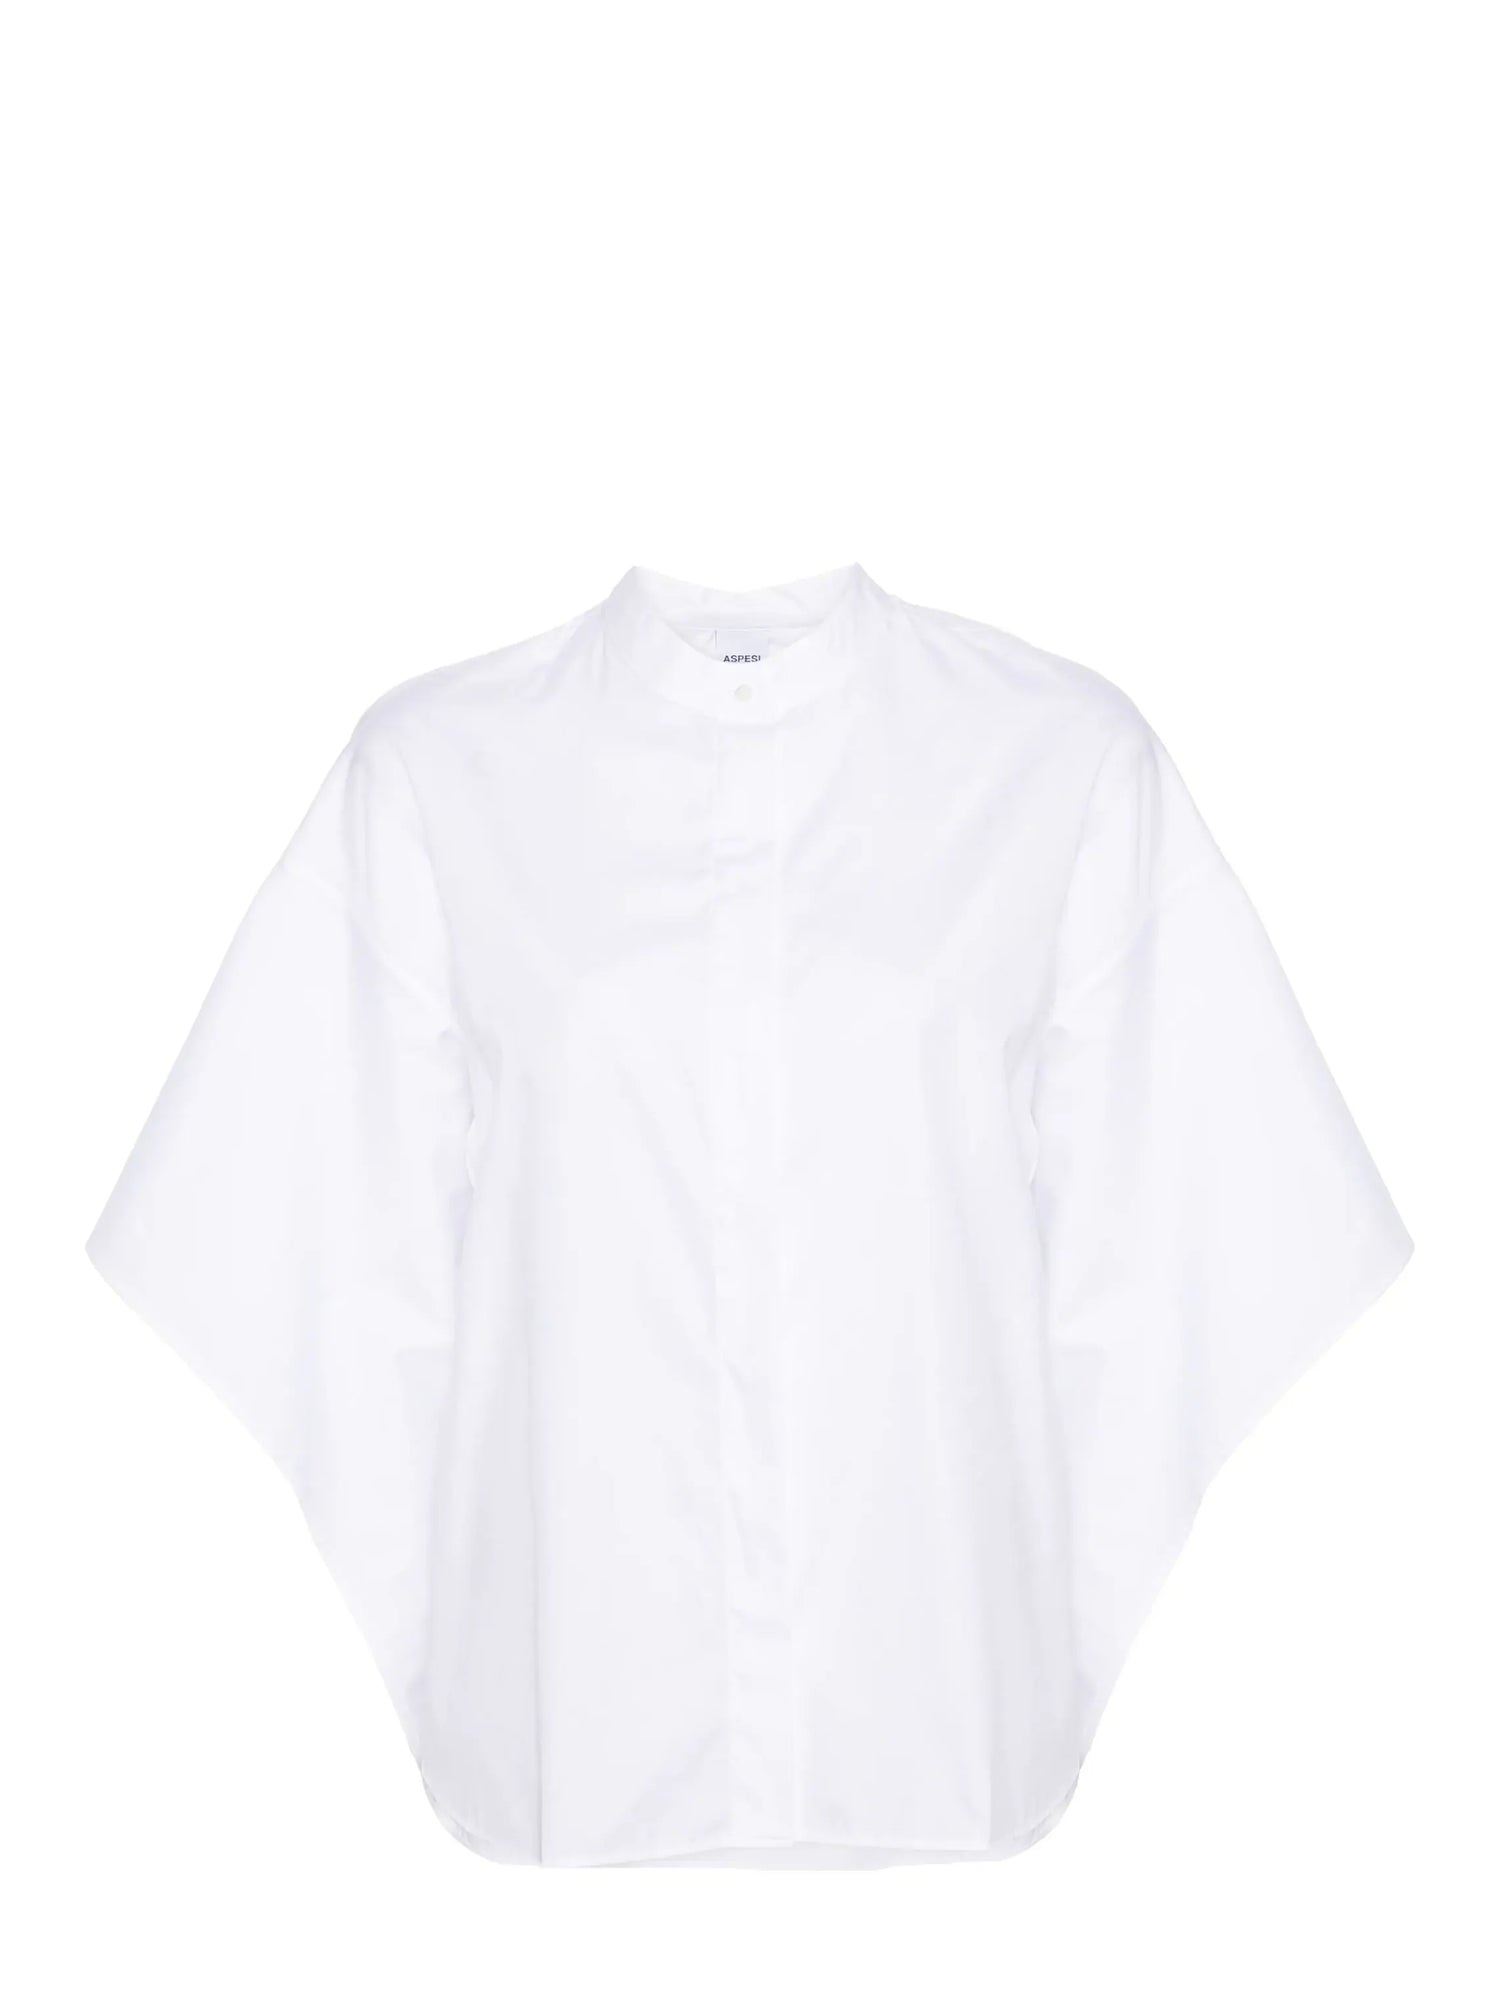 Cotton poplin shirt with cut-out sleeves, white